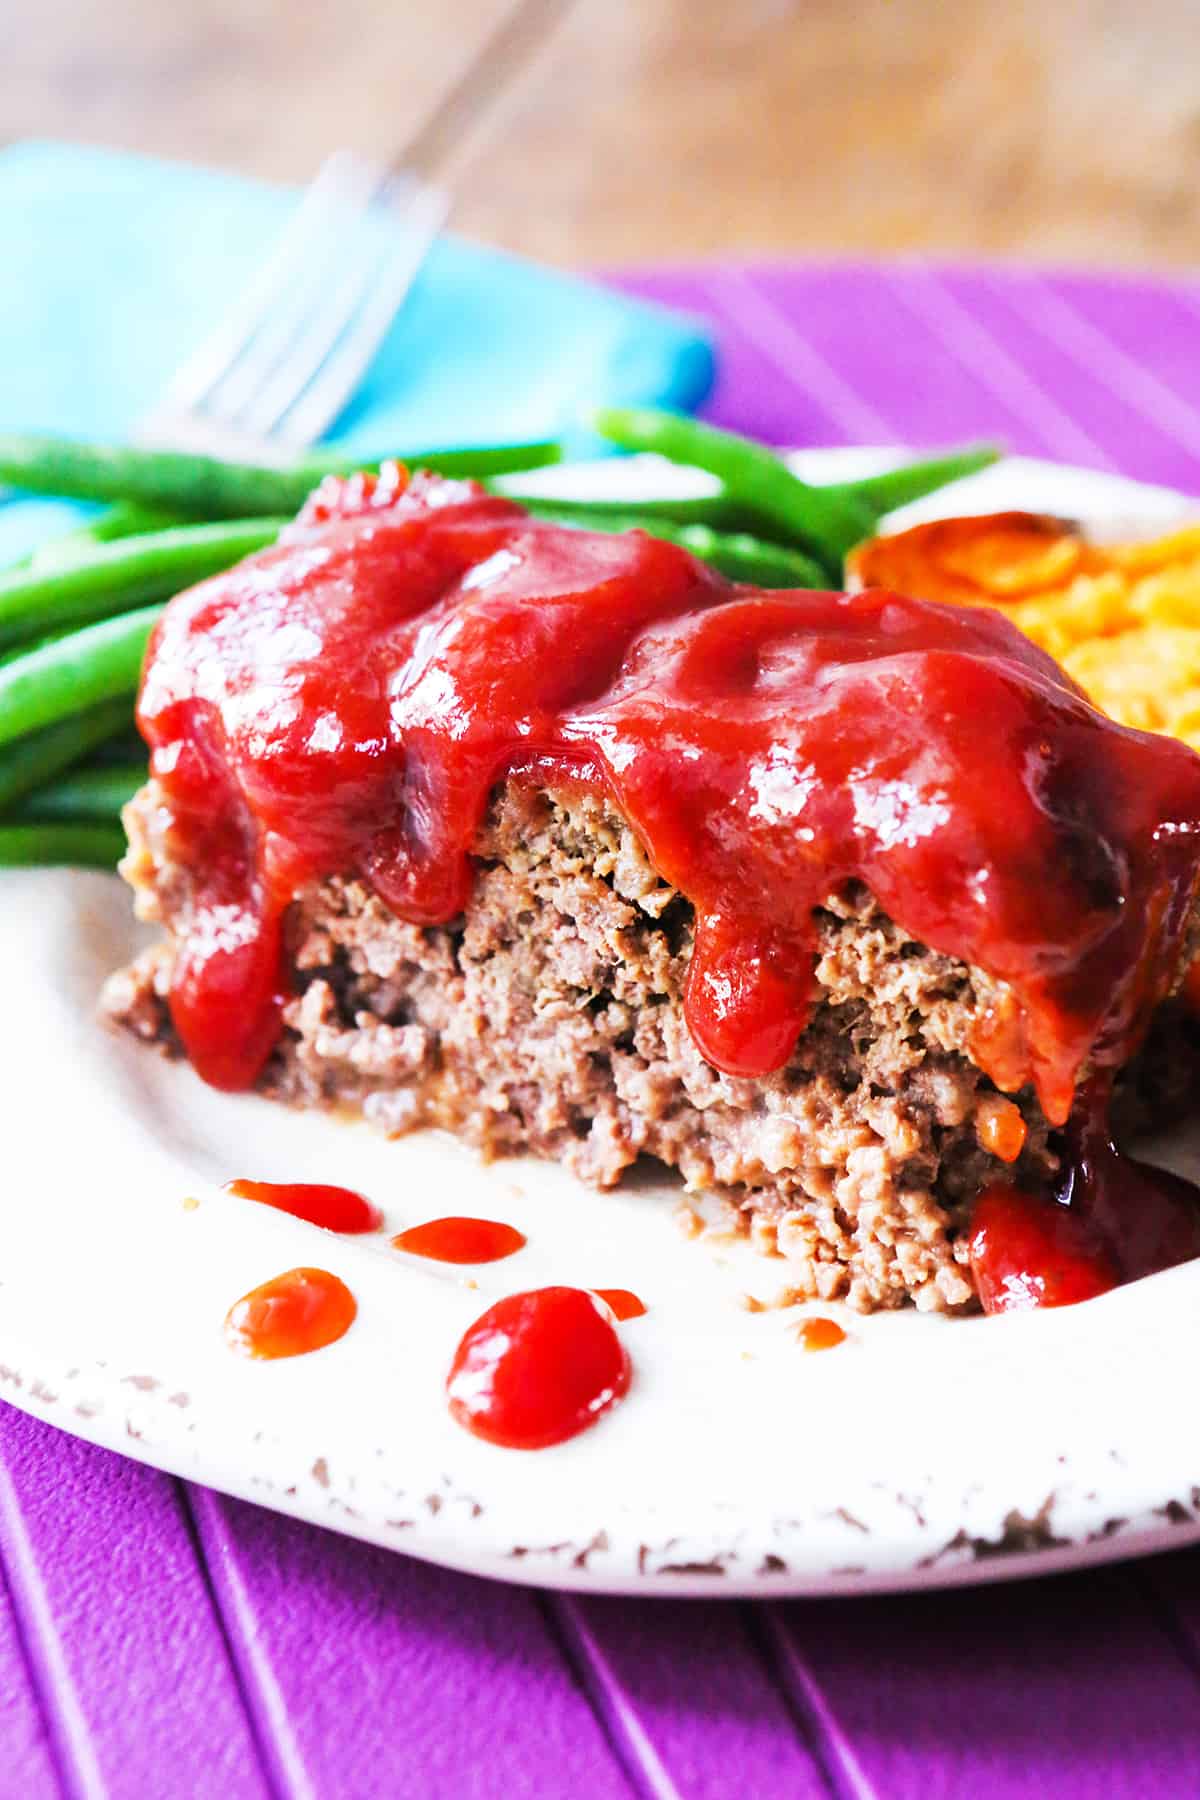 Perfectly cooked slice of meatloaf with red sauce drizzled over the top.